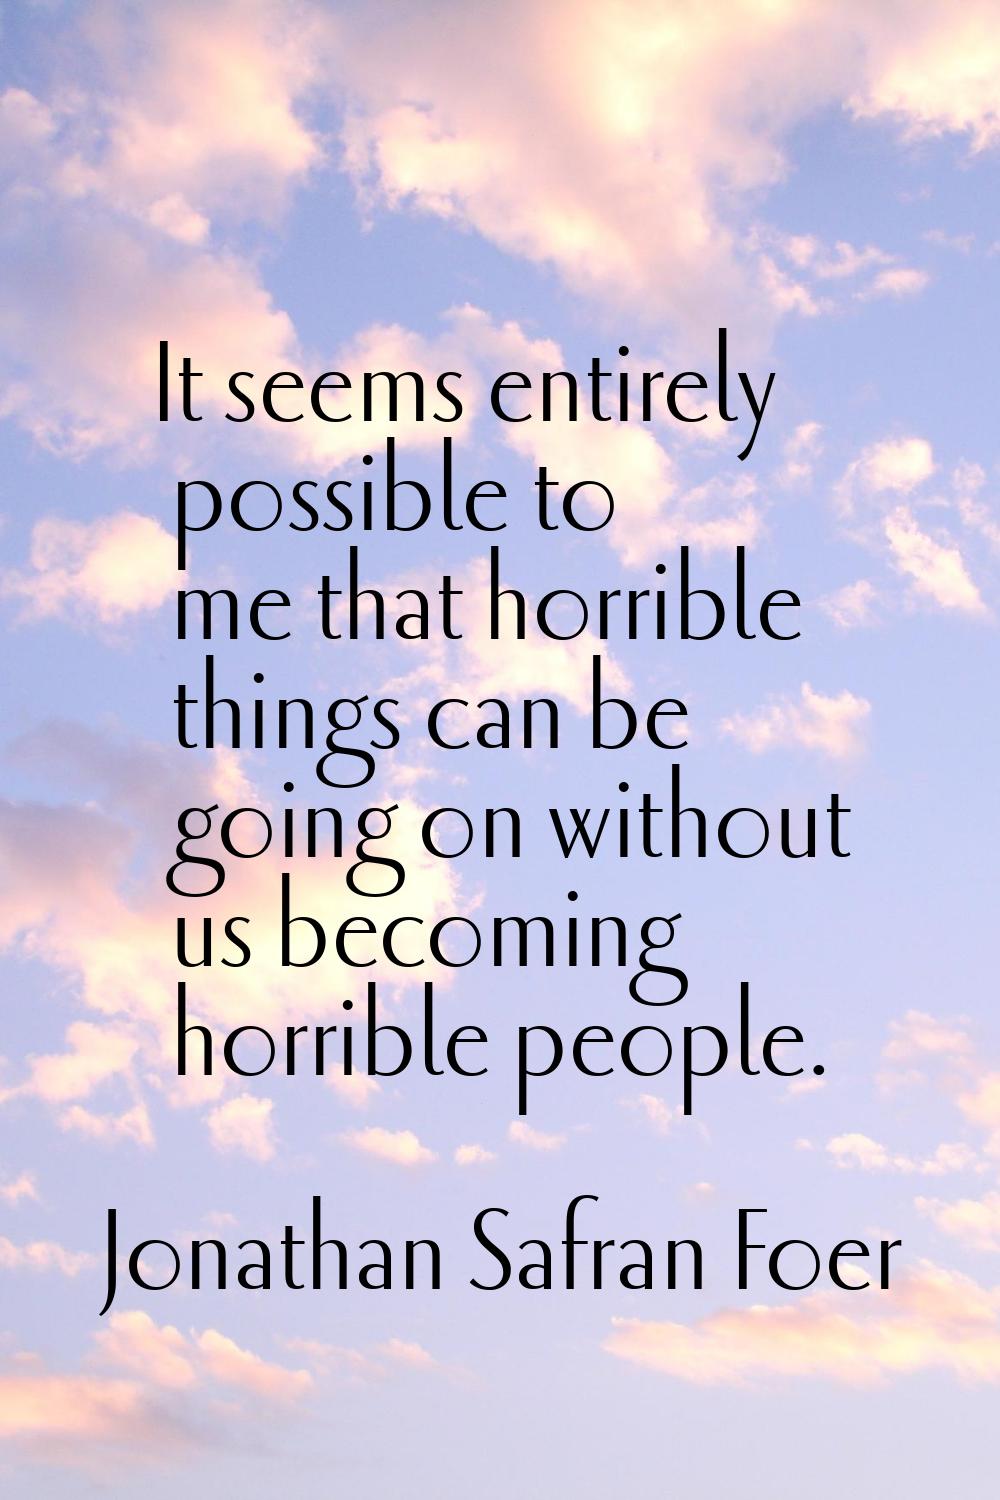 It seems entirely possible to me that horrible things can be going on without us becoming horrible 